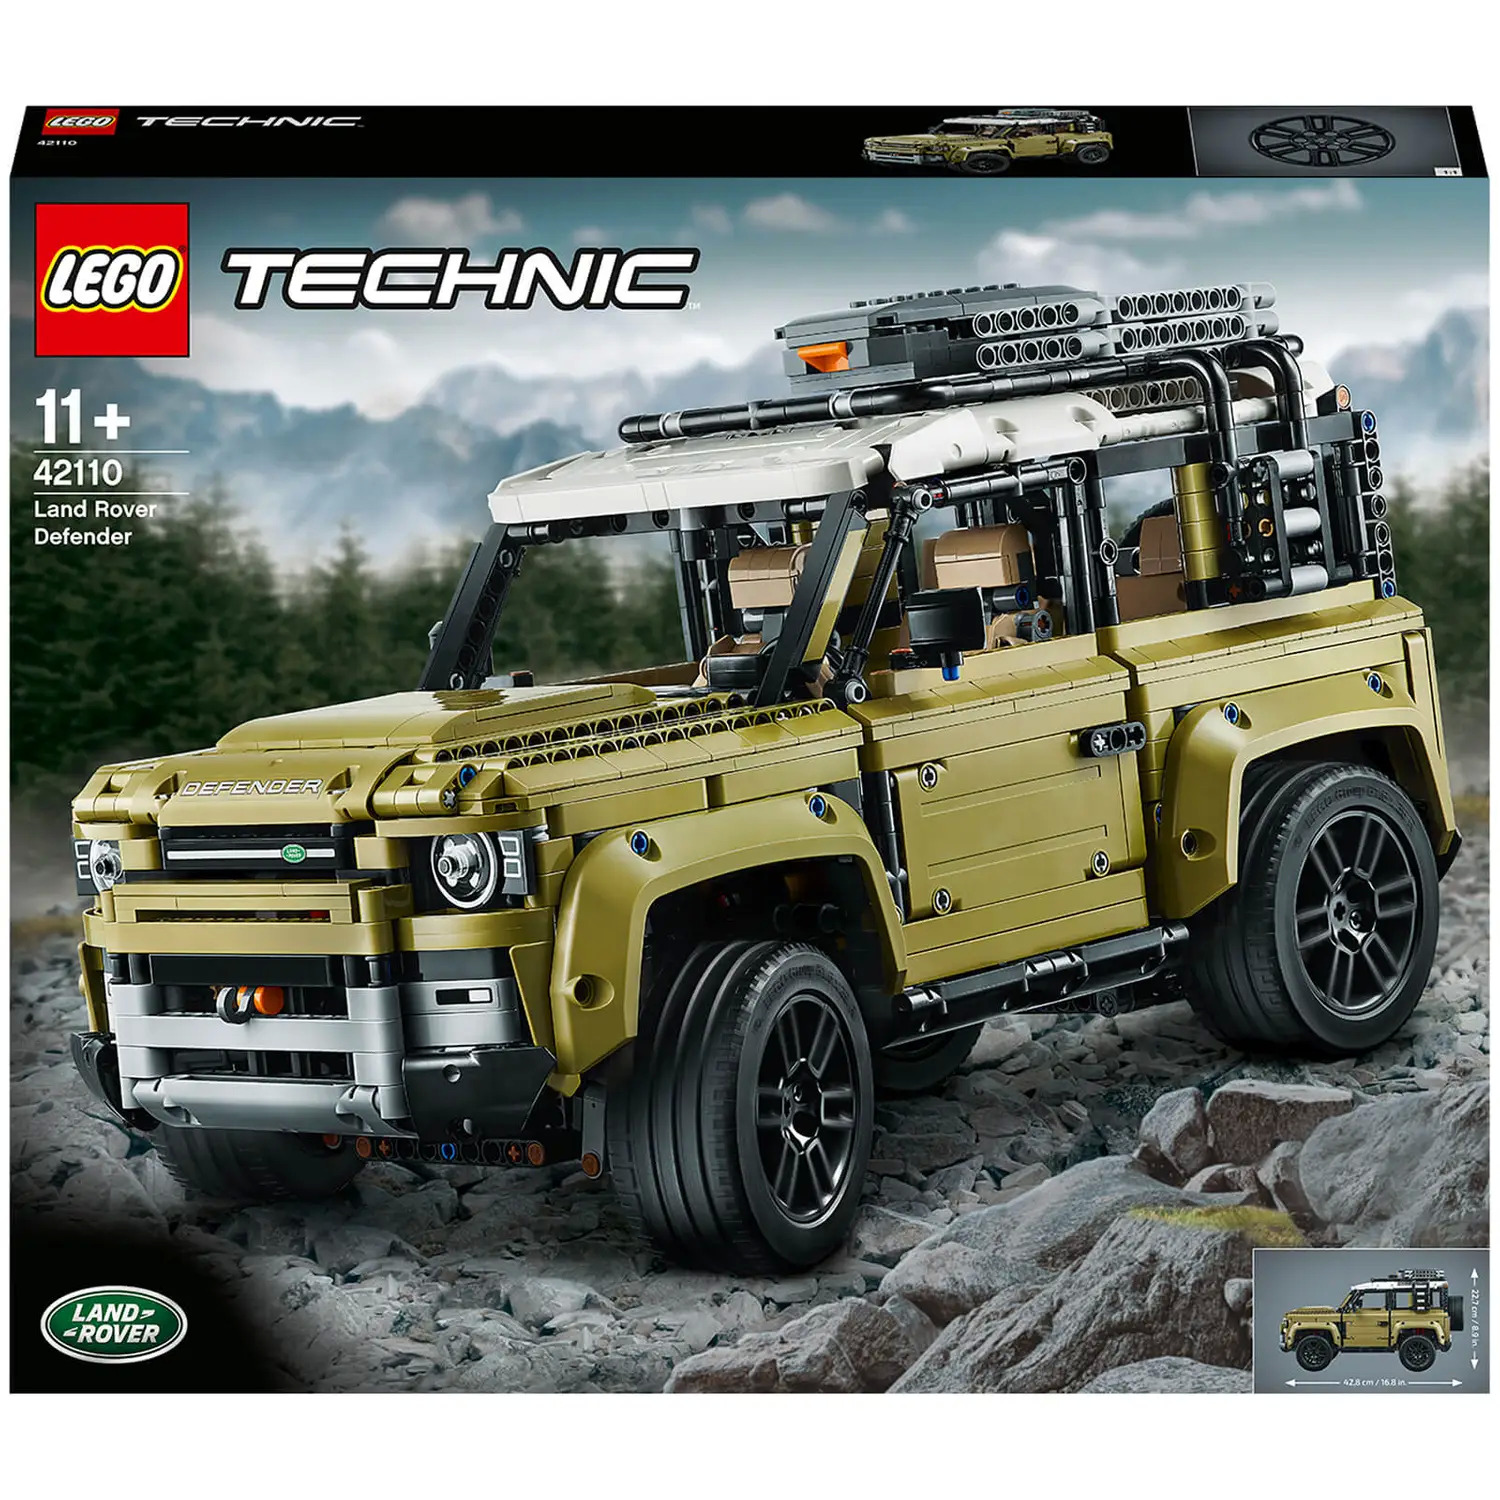 2573-piece LEGO Technic Land Rover Defender (42110) $145 + Free Shipping $144.99